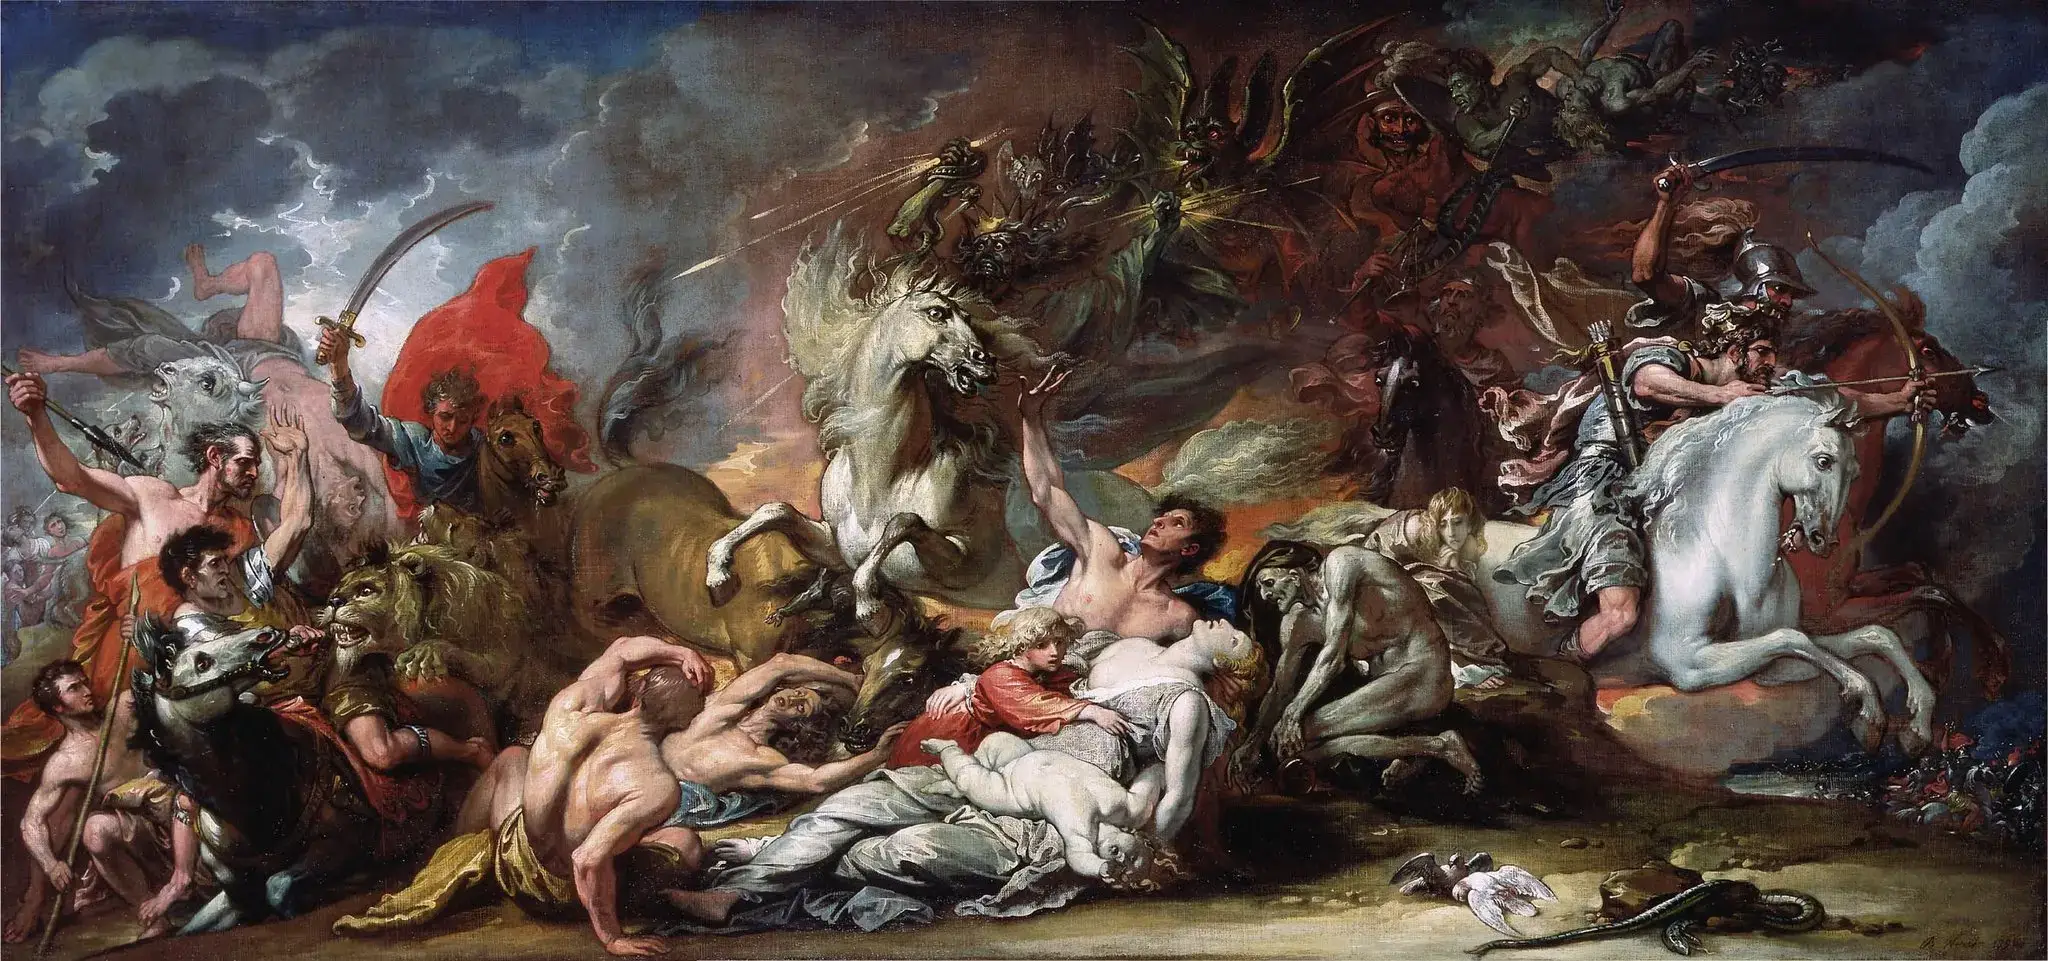 “Death on the Pale Horse,” painted by the American artist Benjamin West in 1796.